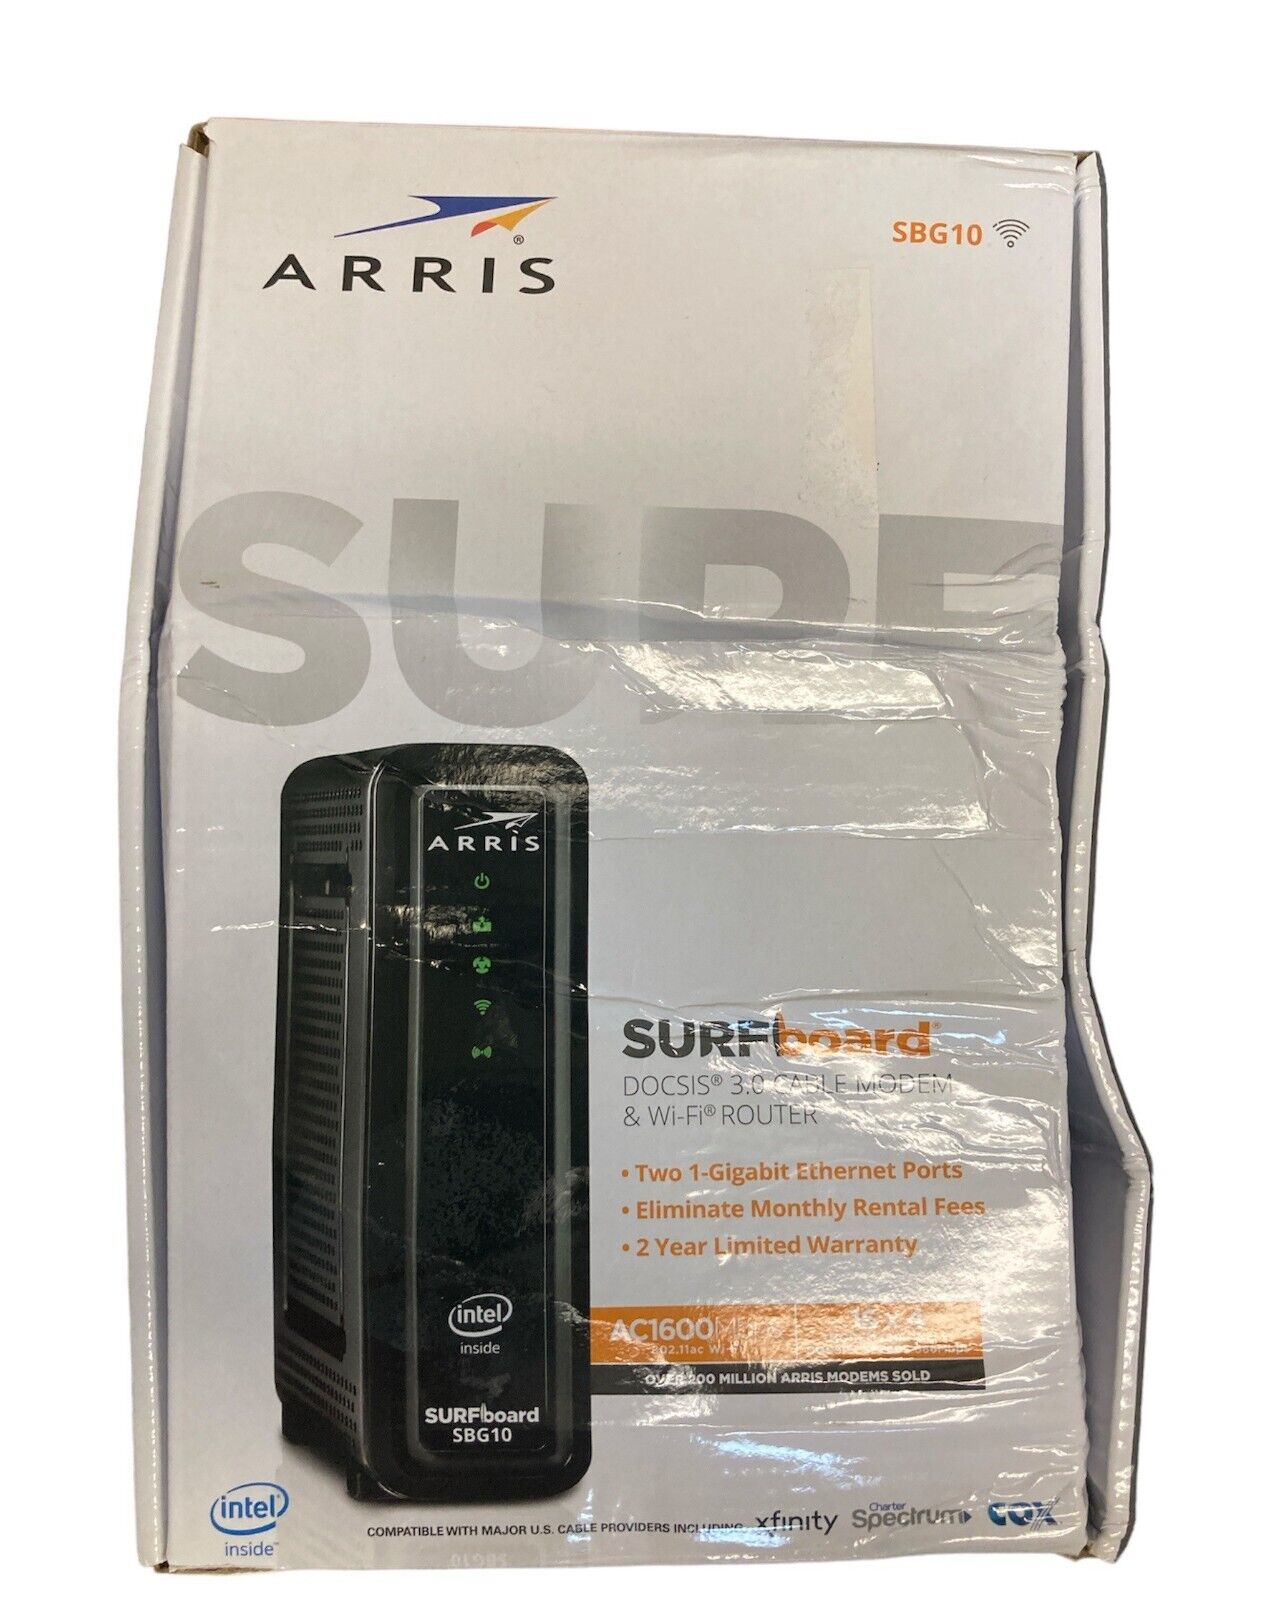 Arris Surfboard SBG10 Dual Band Router 16 X 4 DOCSIS 3.0 Cable Modem AC1600 Blk